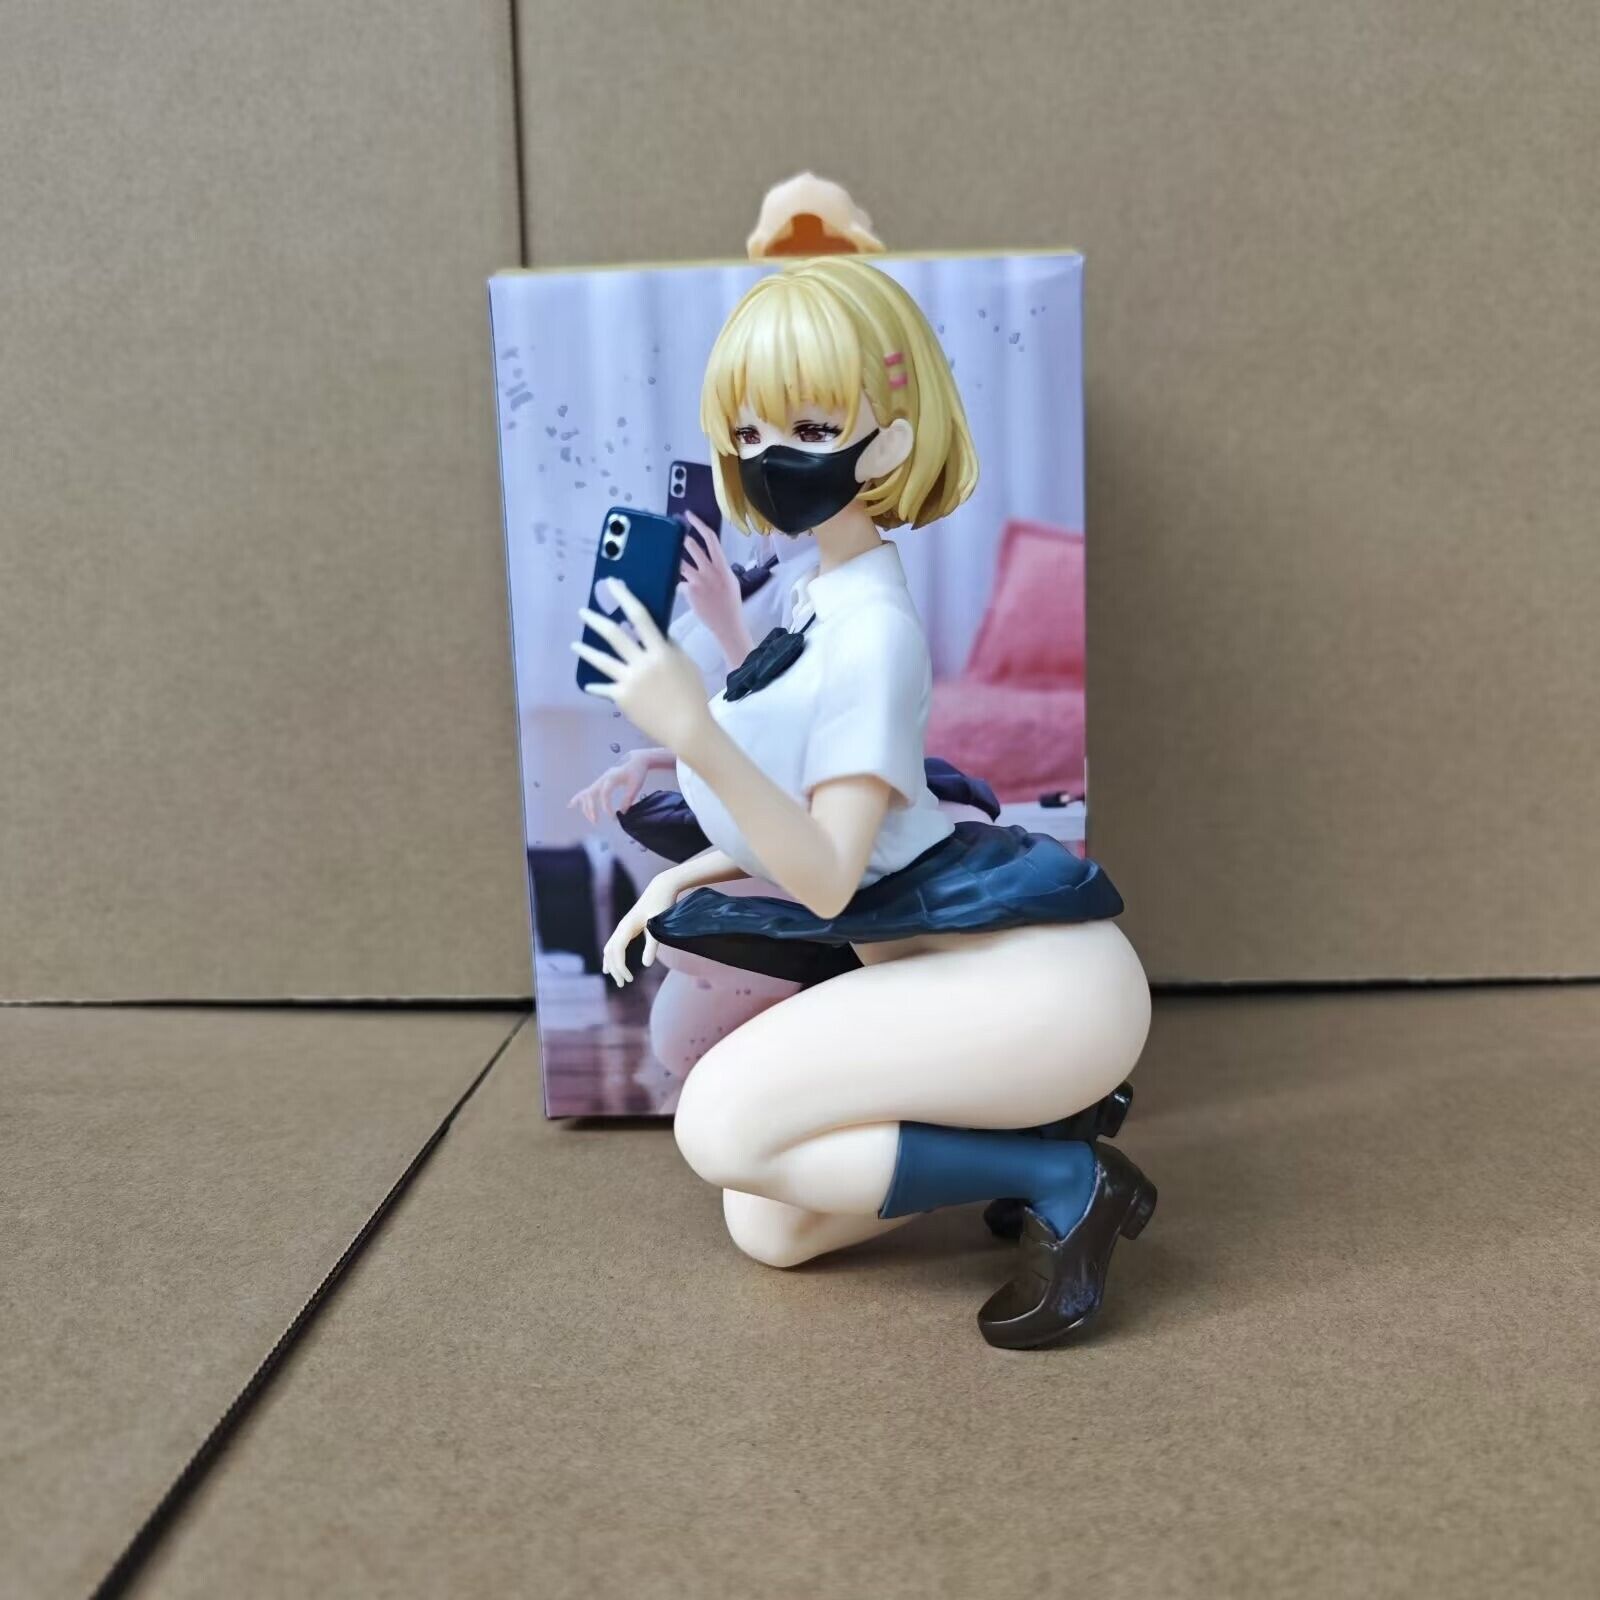 Anime key-animator Lovely daughter PVC Action Figure New No Box toy model